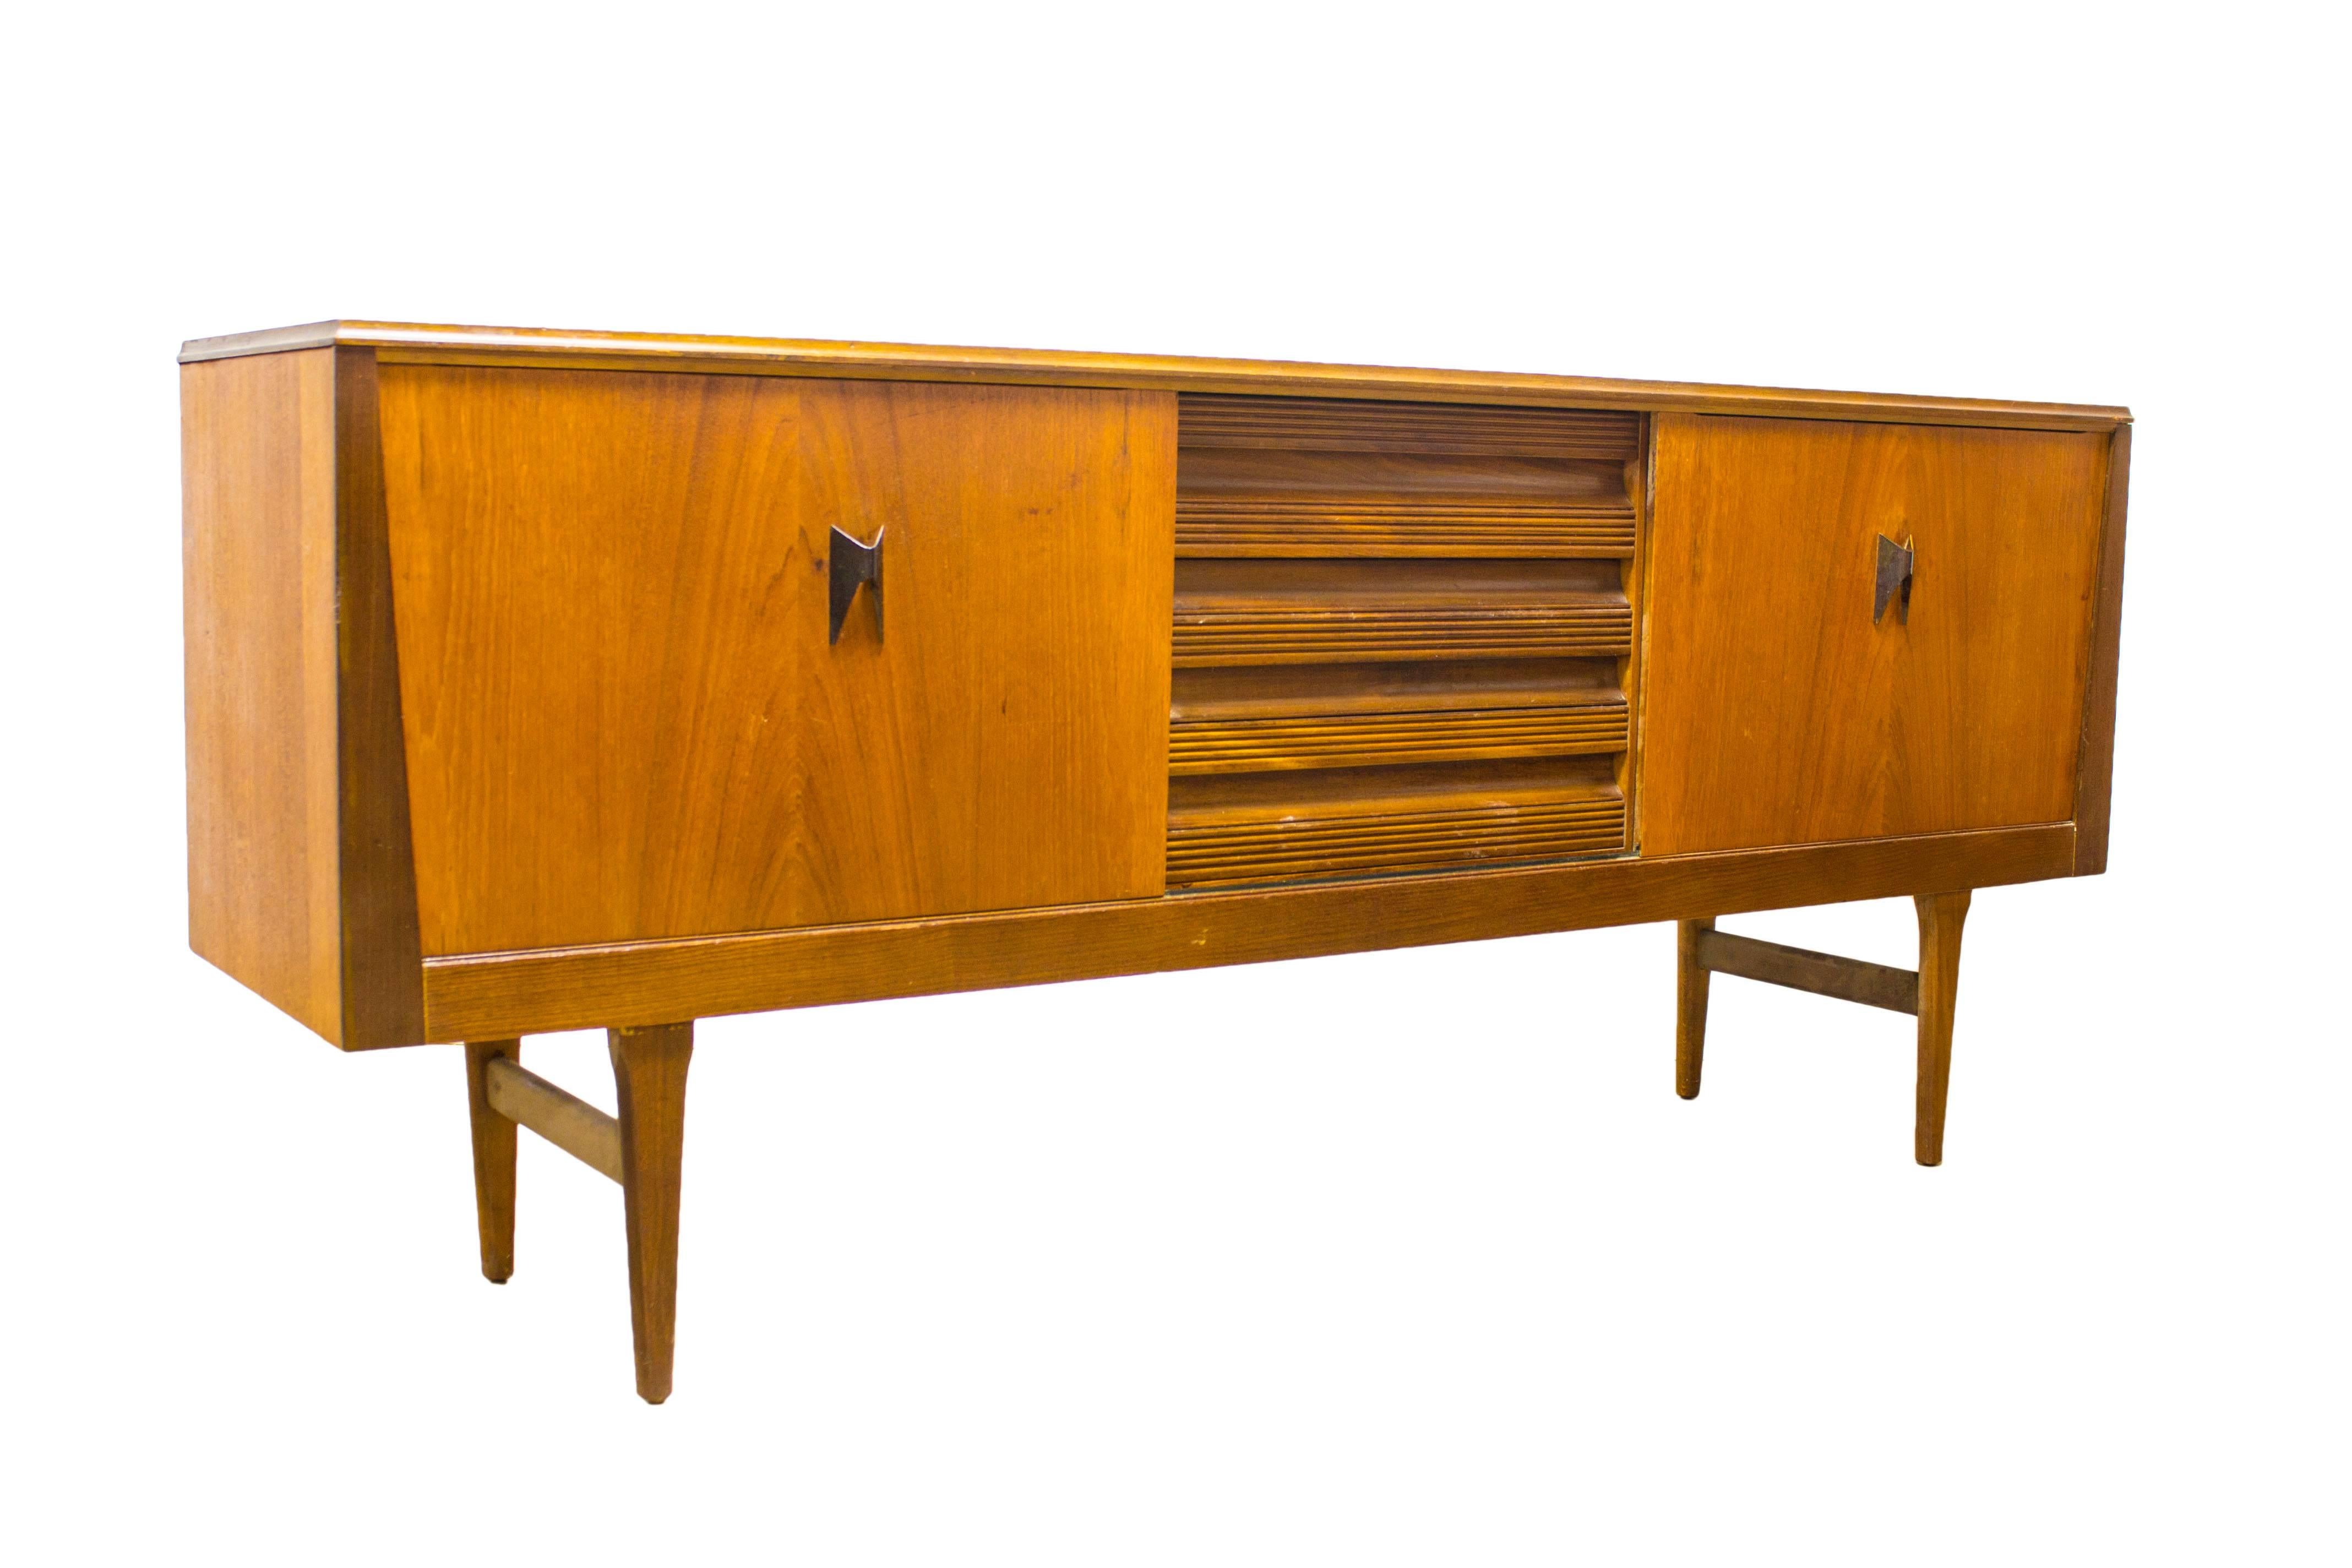 Elliotts of Newbury 'Eon' Teak and Afromosia Sideboard In Excellent Condition For Sale In Greater Manchester, GB